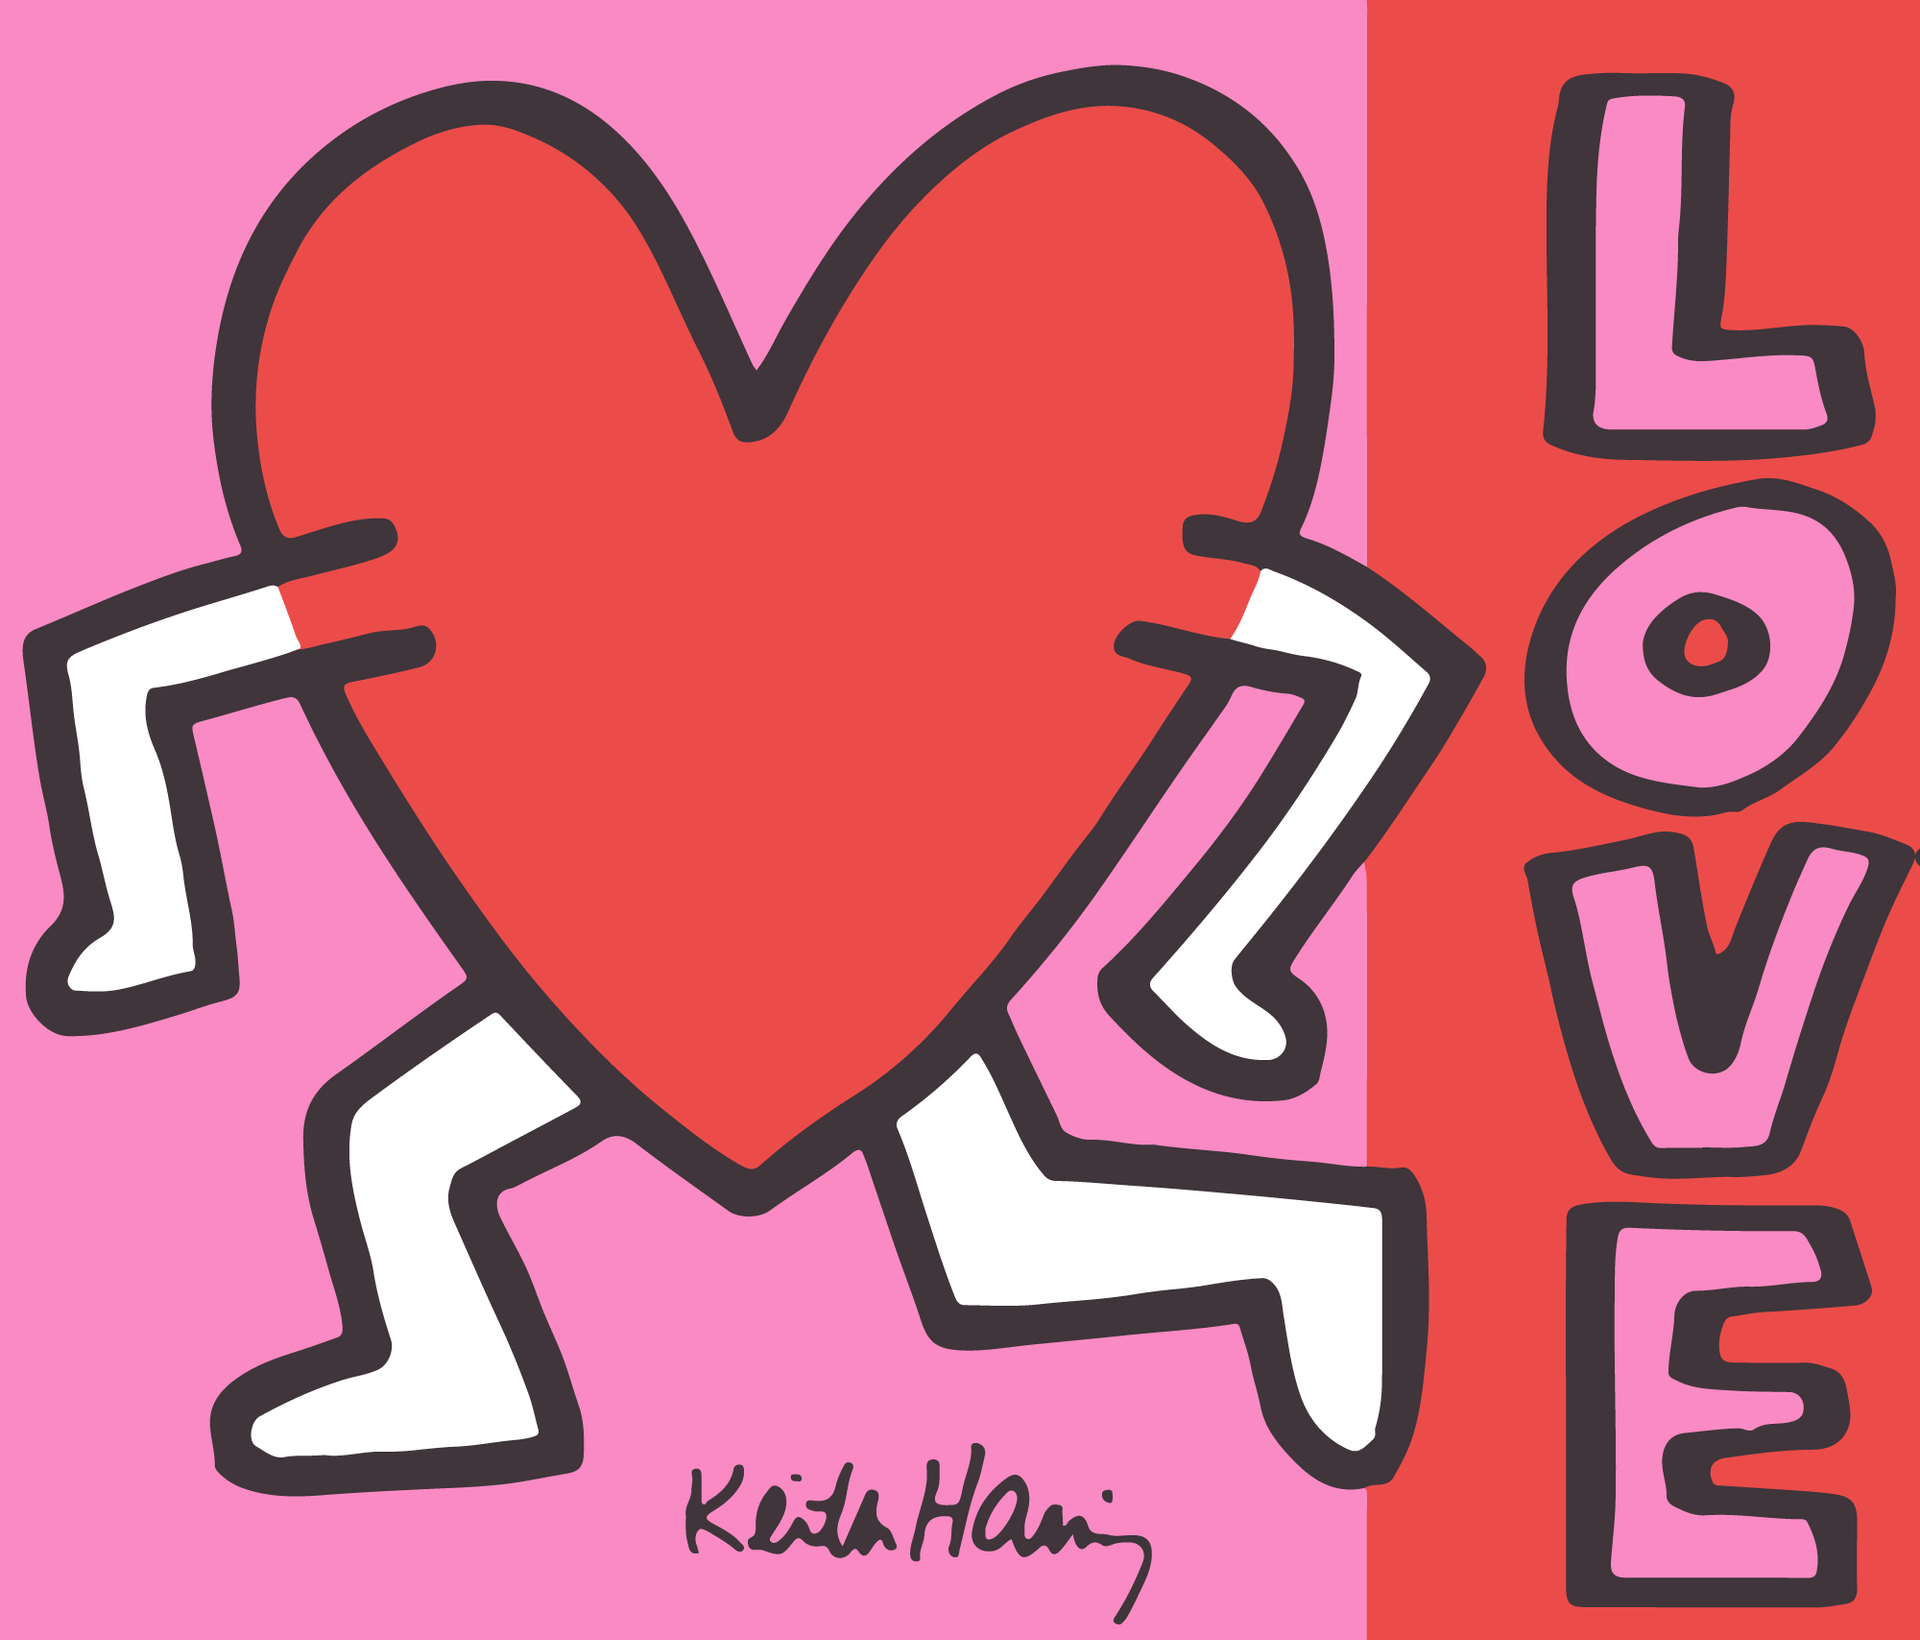 Keith Haring's art - A giant red heart with white legs and arms on a pink background, says 